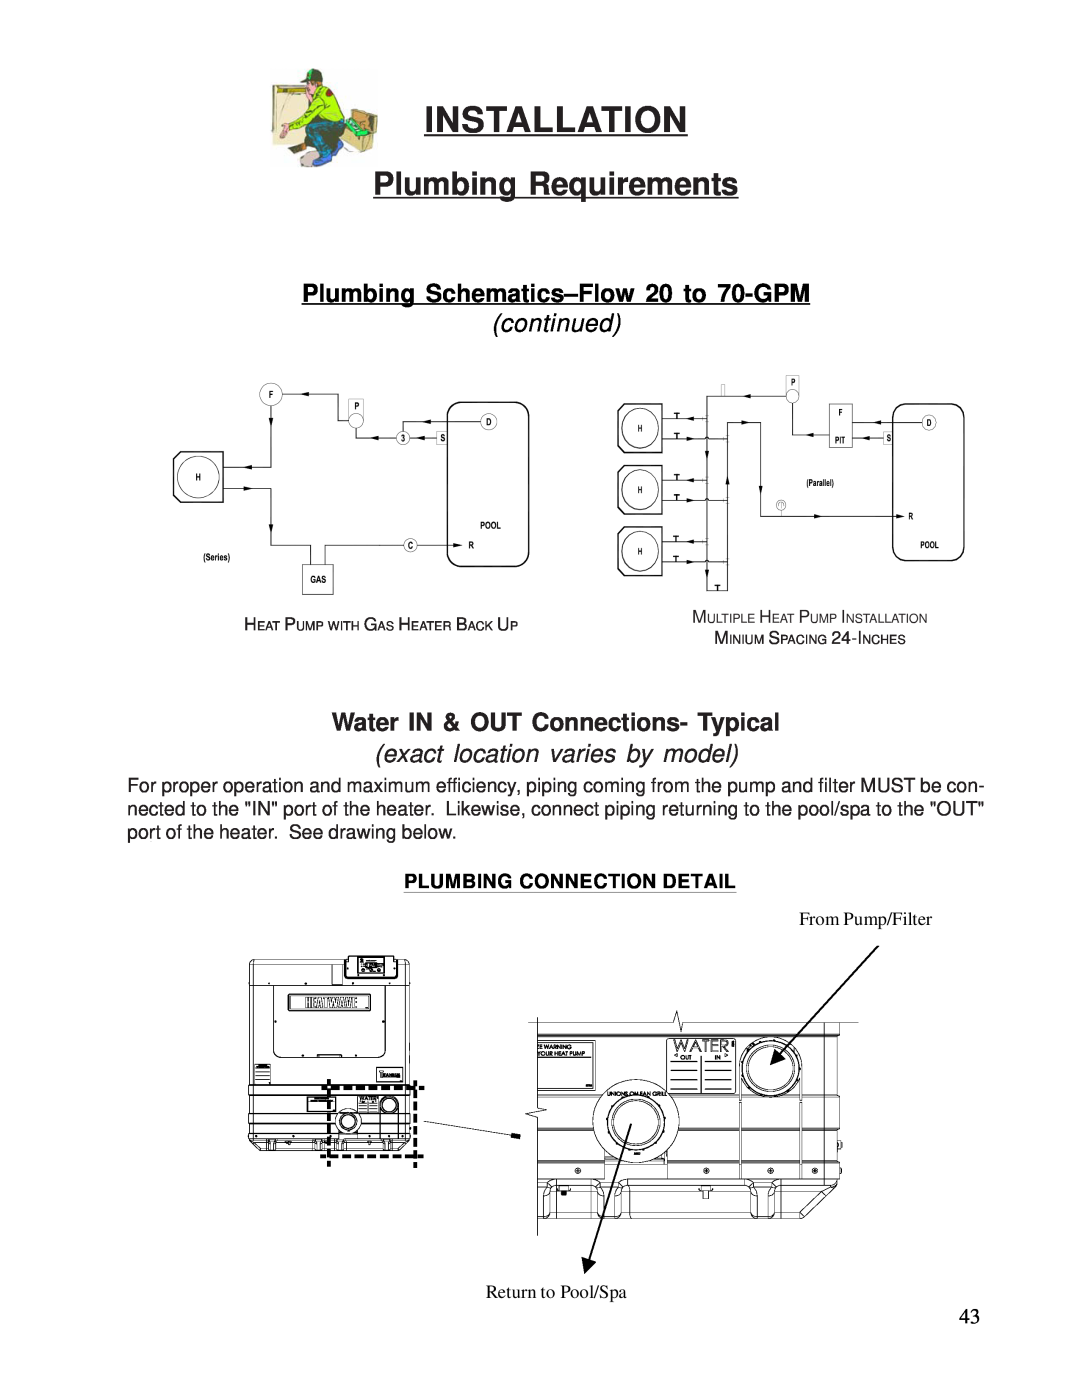 Aquacal 100 Plumbing Schematics-Flow20 to 70-GPM, Water IN & OUT Connections- Typical, Installation, Plumbing Requirements 